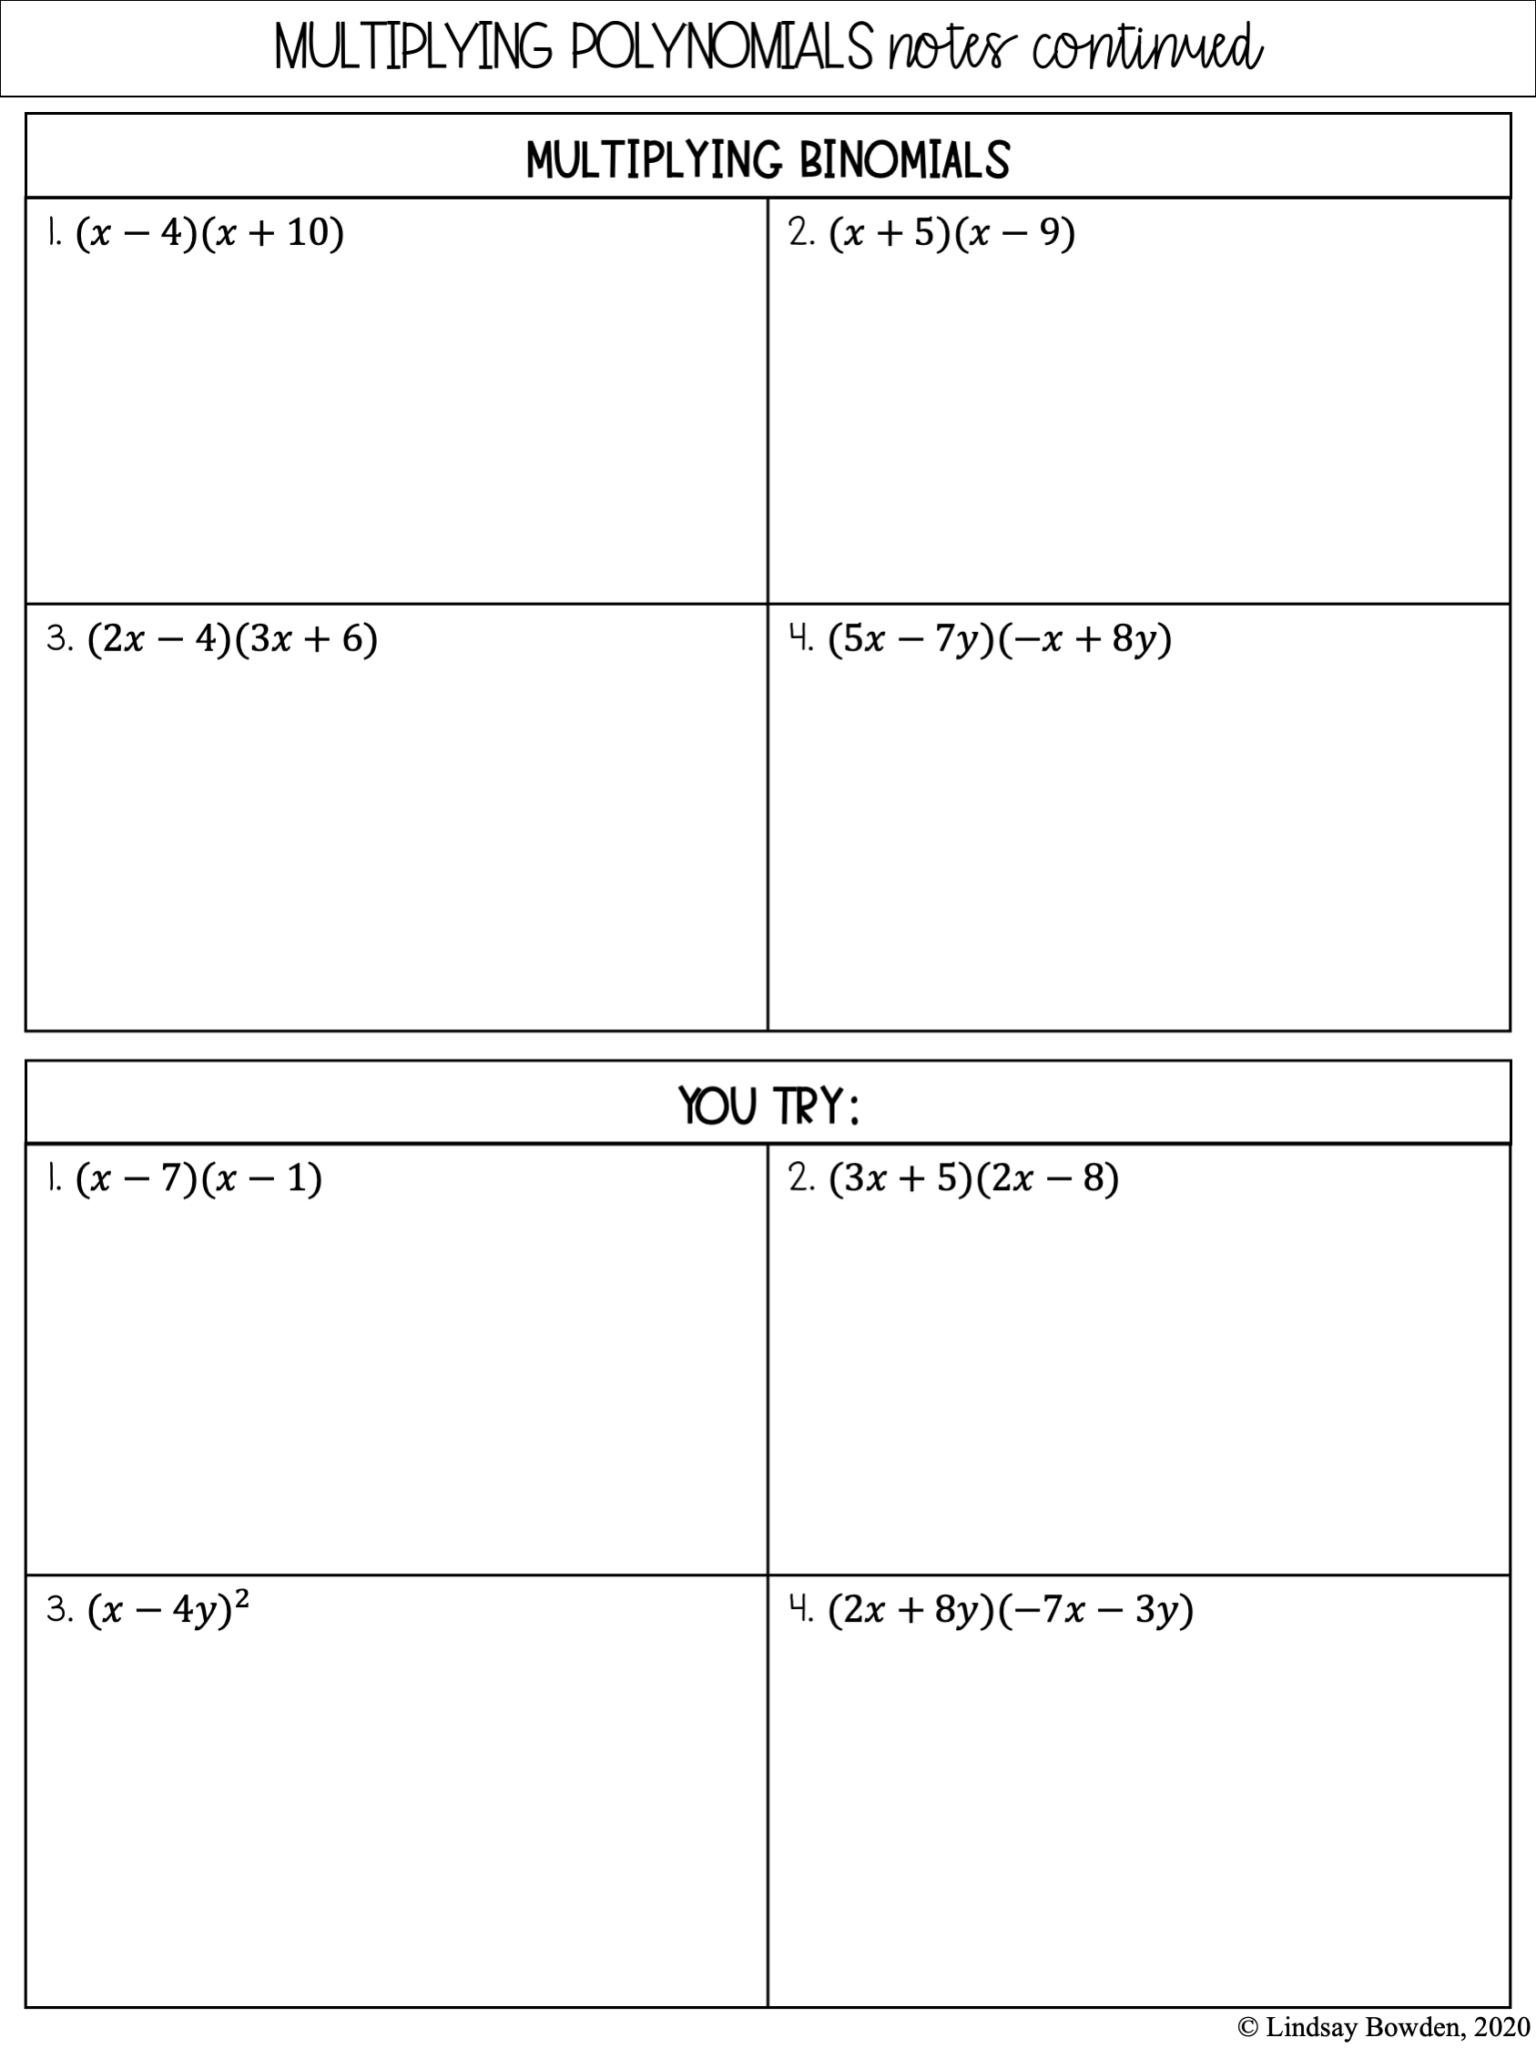 Multiplication Of Polynomials Worksheet Answers